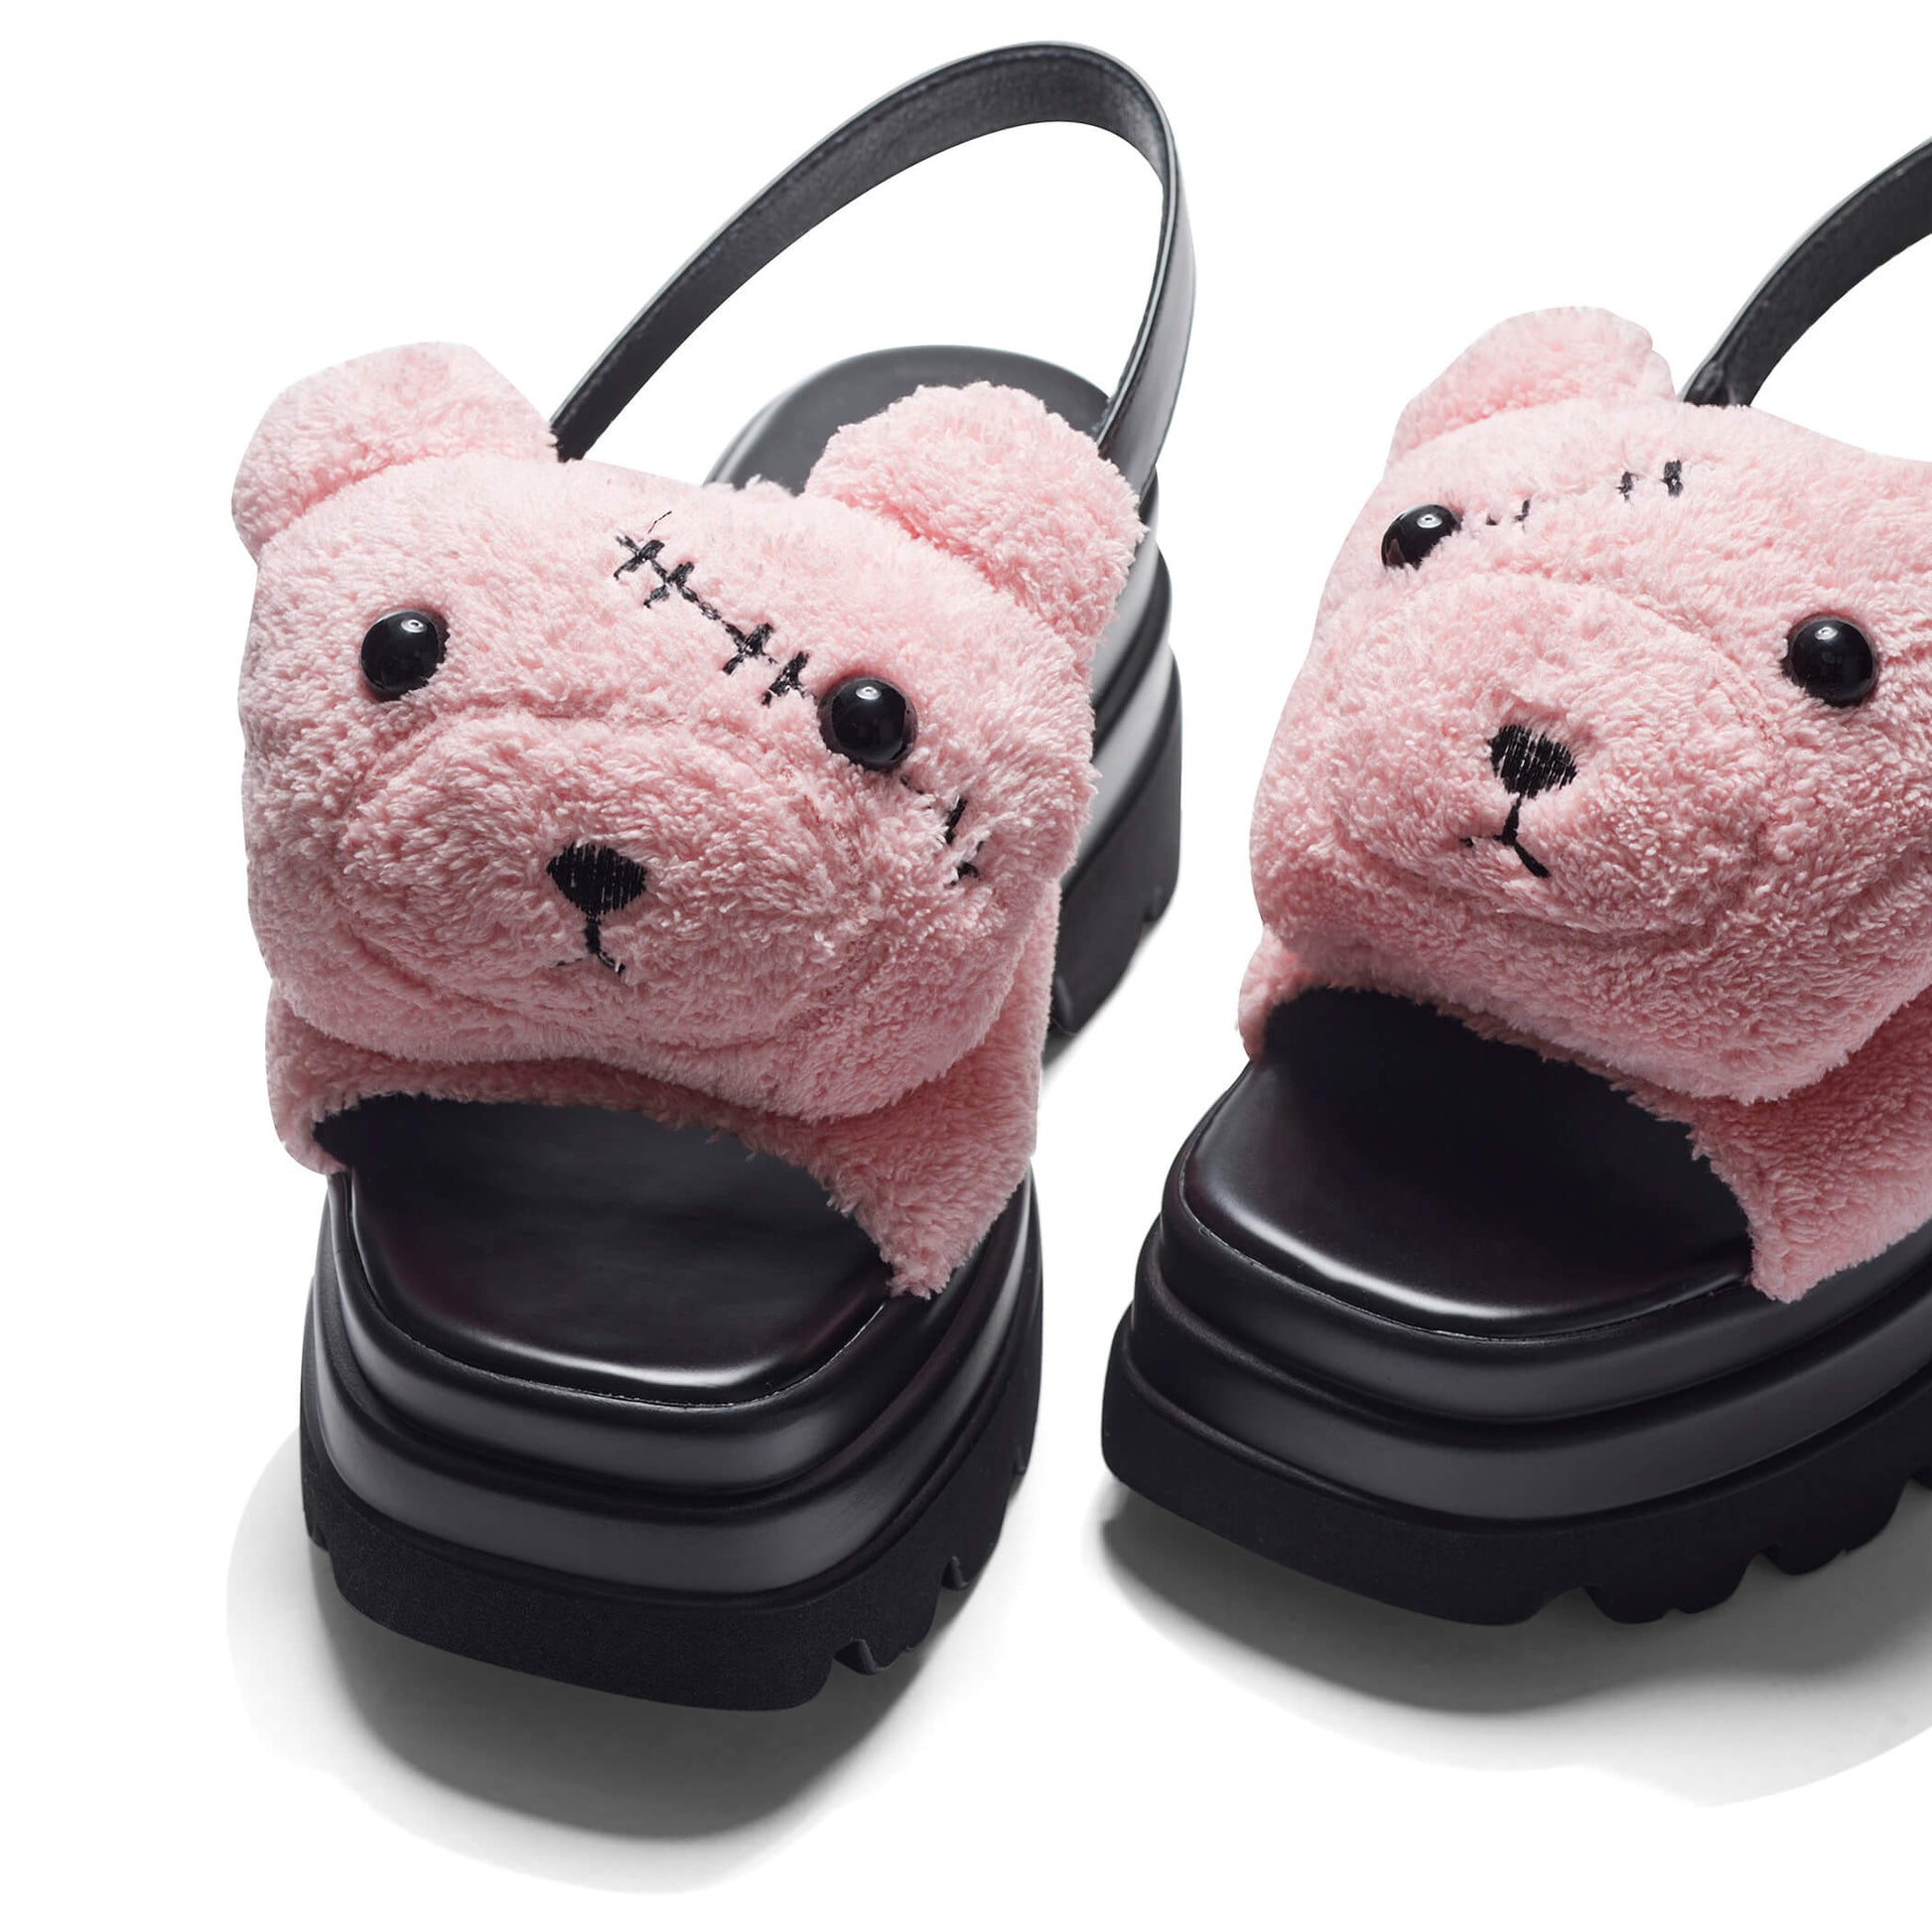 Binky Fuzzy Chunky Sandals - Pink - KOI Footwear - Front View